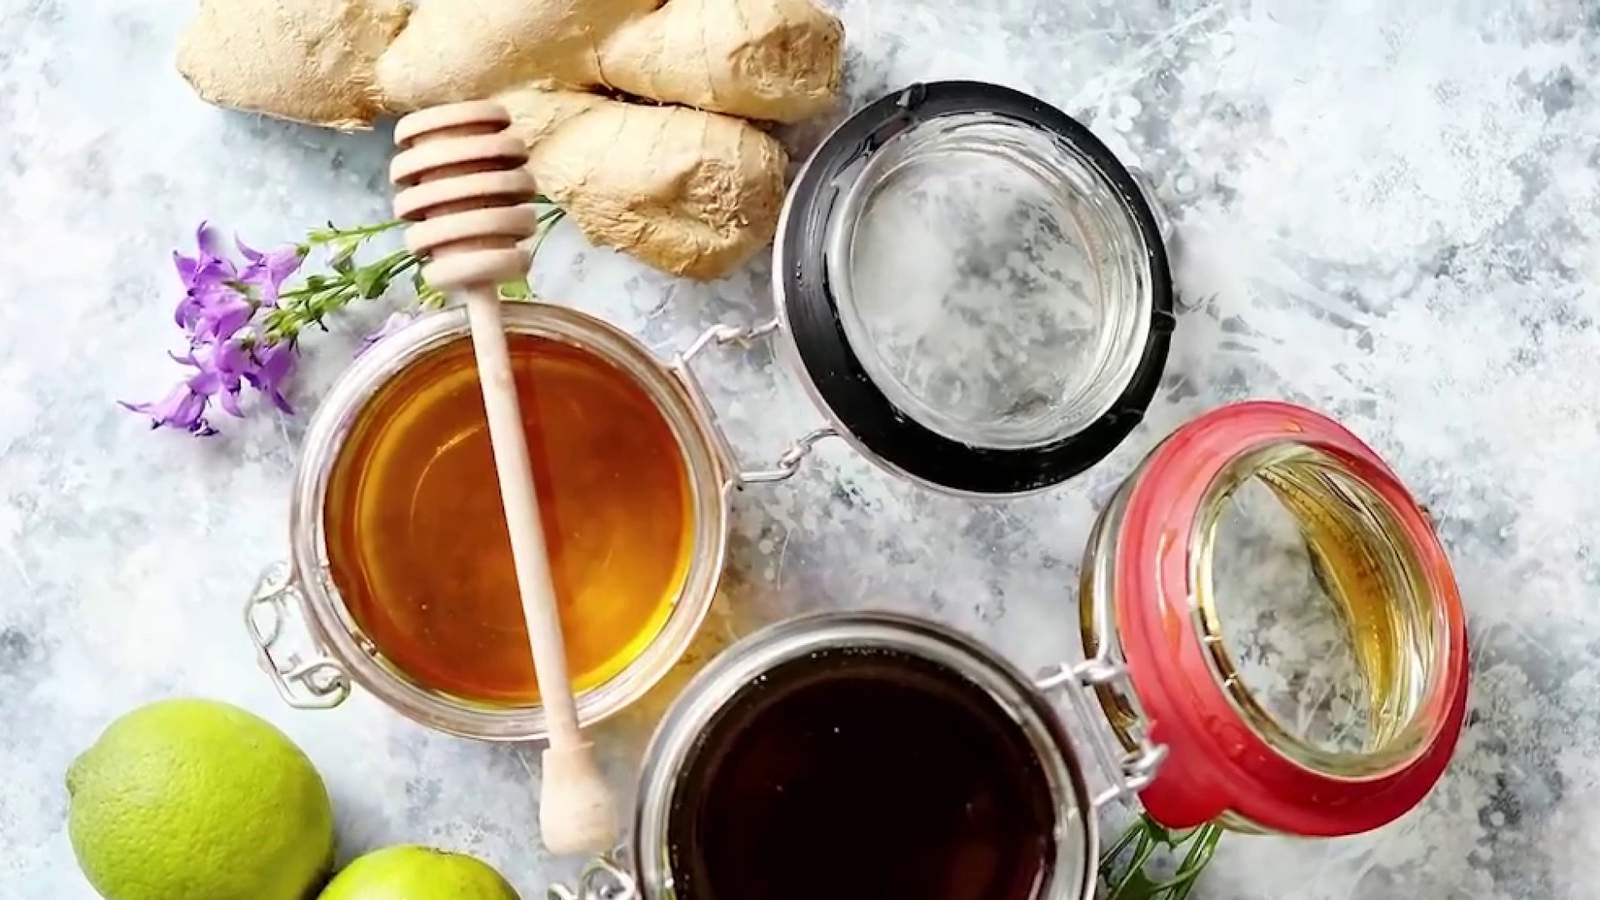 Feeling under the weather? Experts say these home remedies may help you feel better